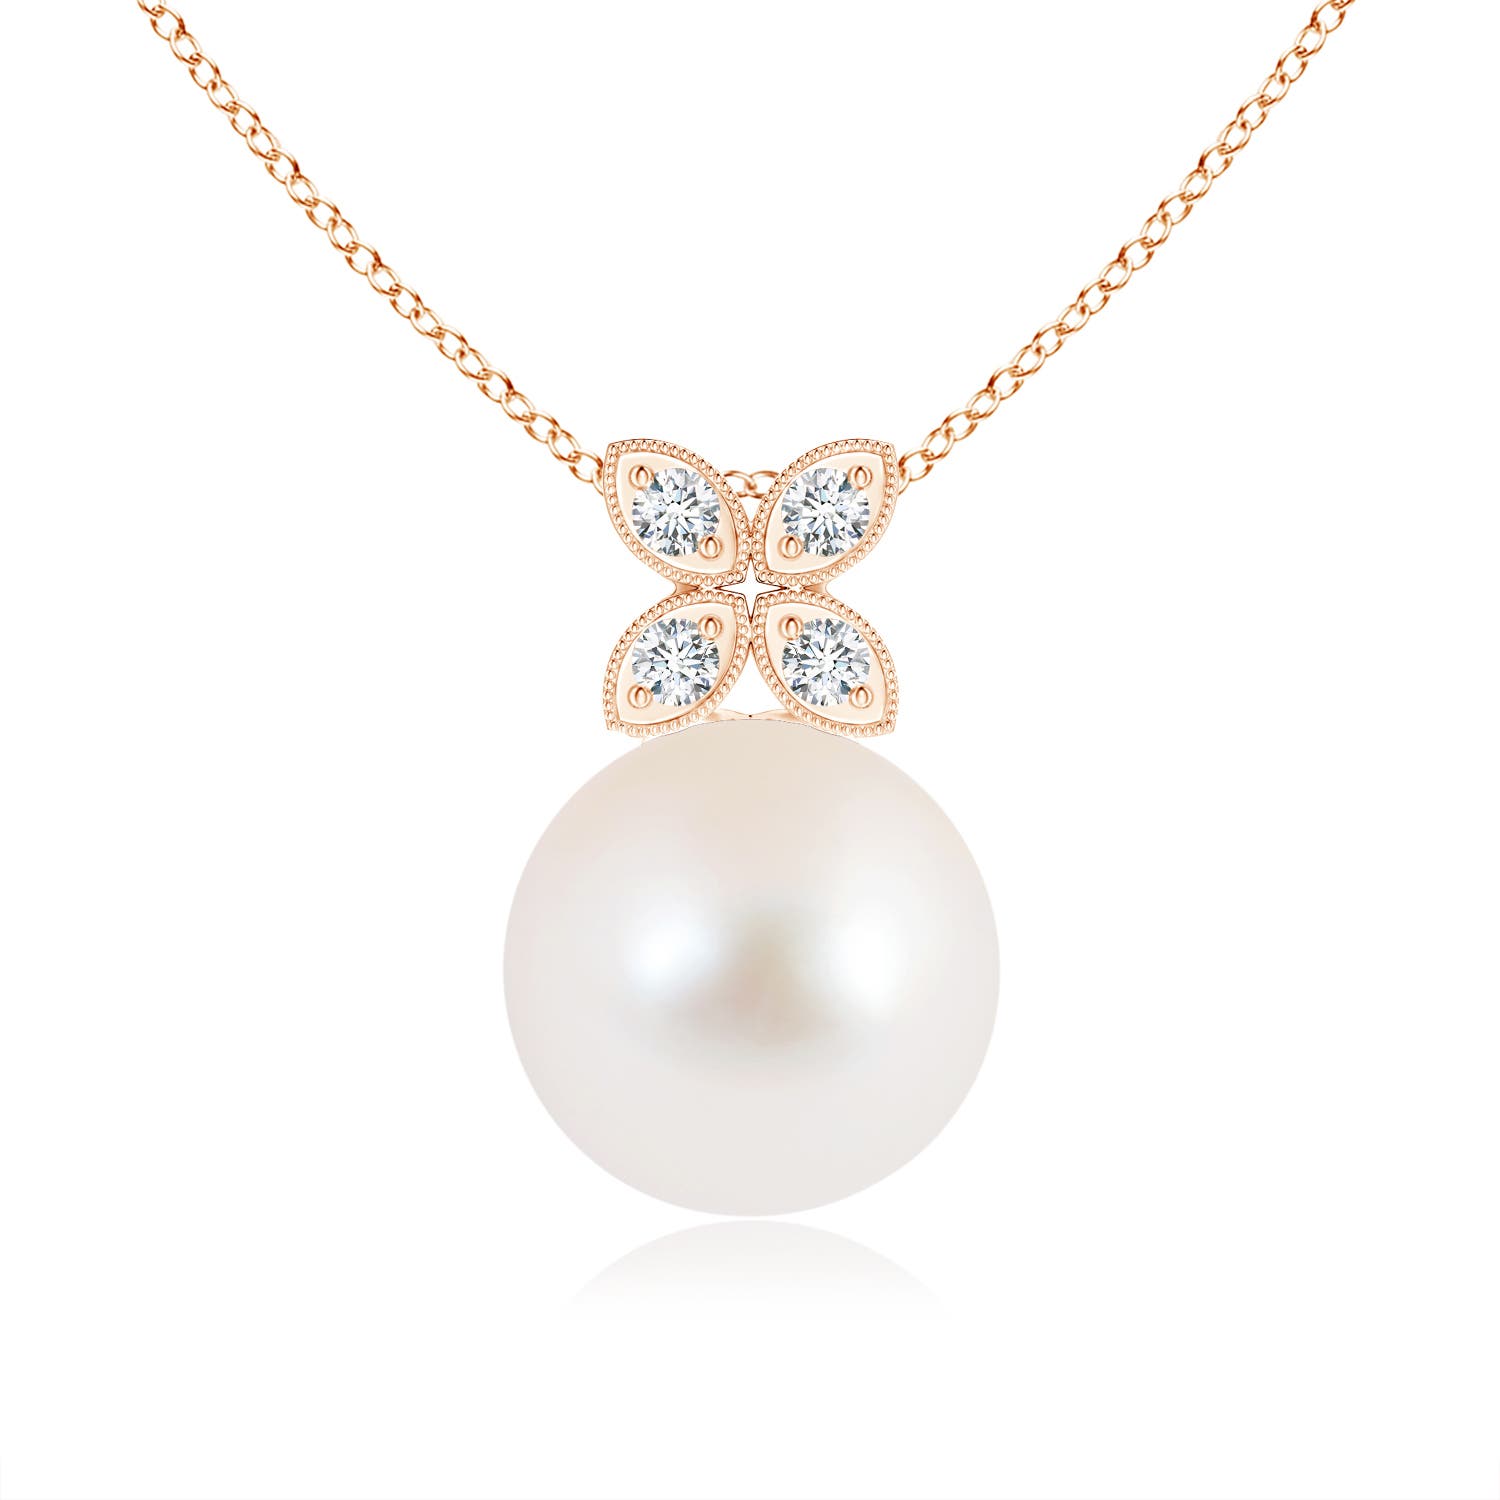 AAA - Freshwater Cultured Pearl / 5.32 CT / 14 KT Rose Gold